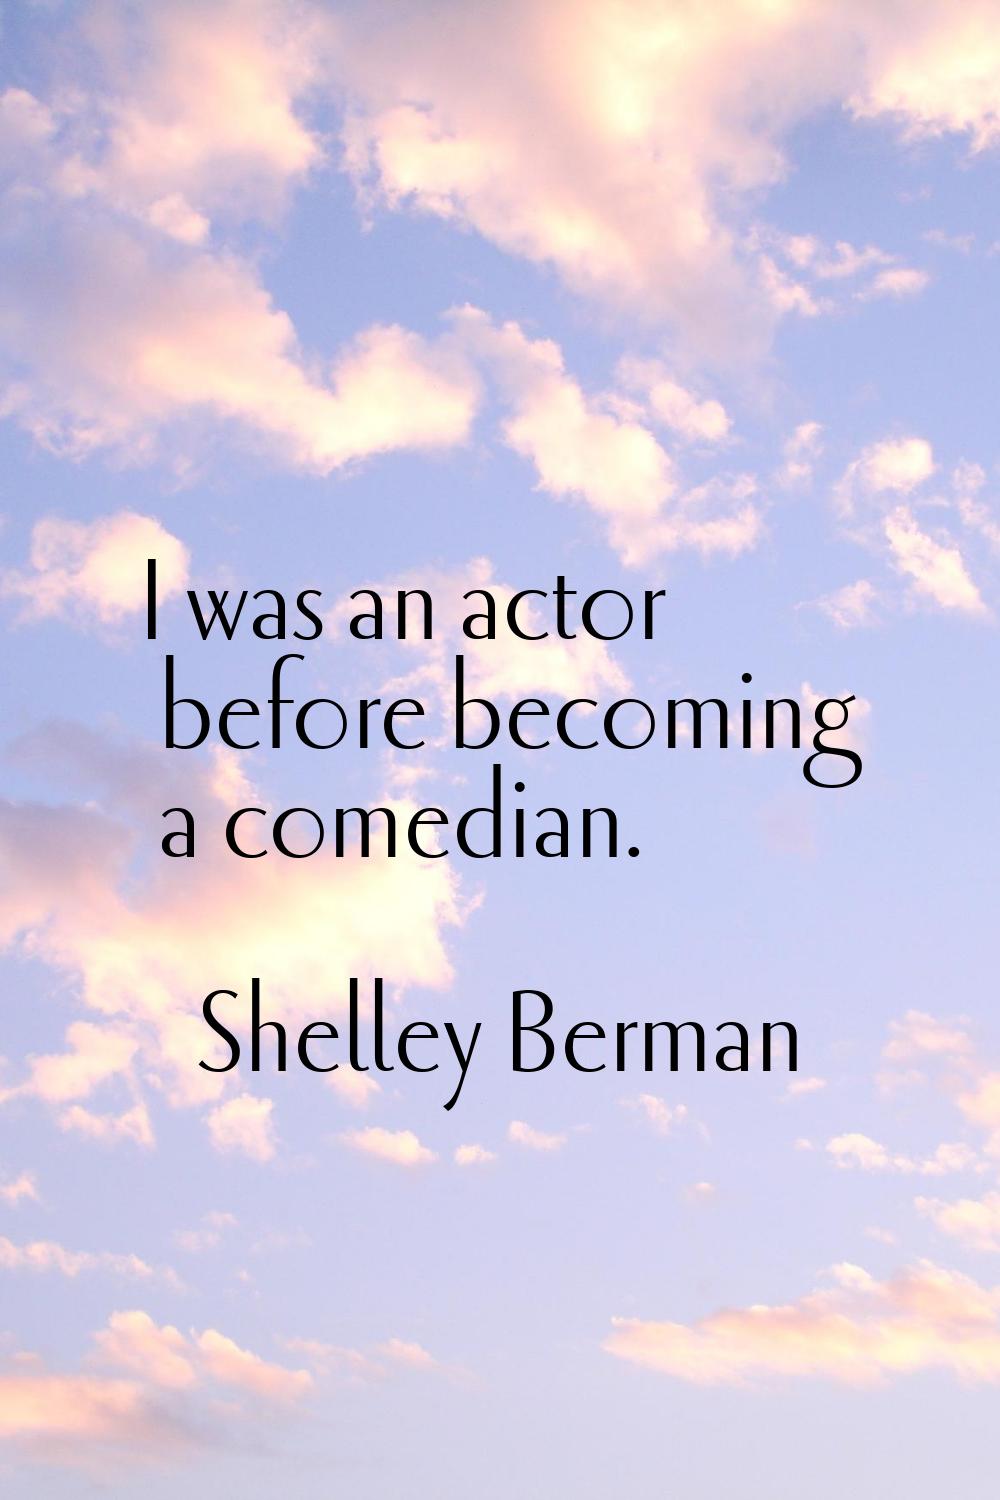 I was an actor before becoming a comedian.